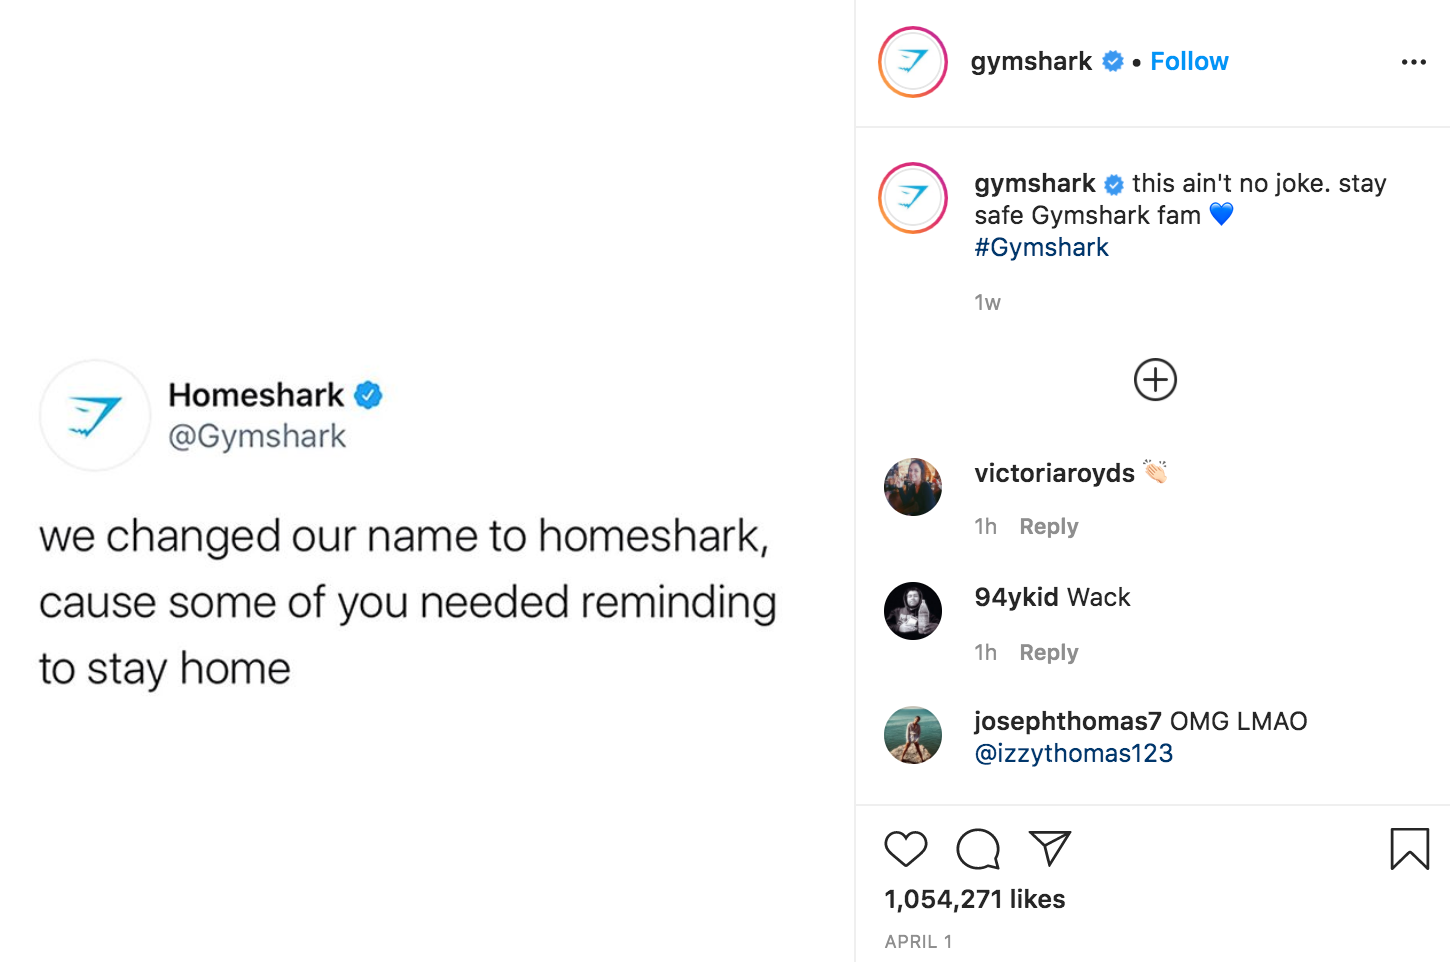 This Instagram post from Gymshark, itself a cross-post from Gymshark's Twitter, is the brand's most-engaged post ever